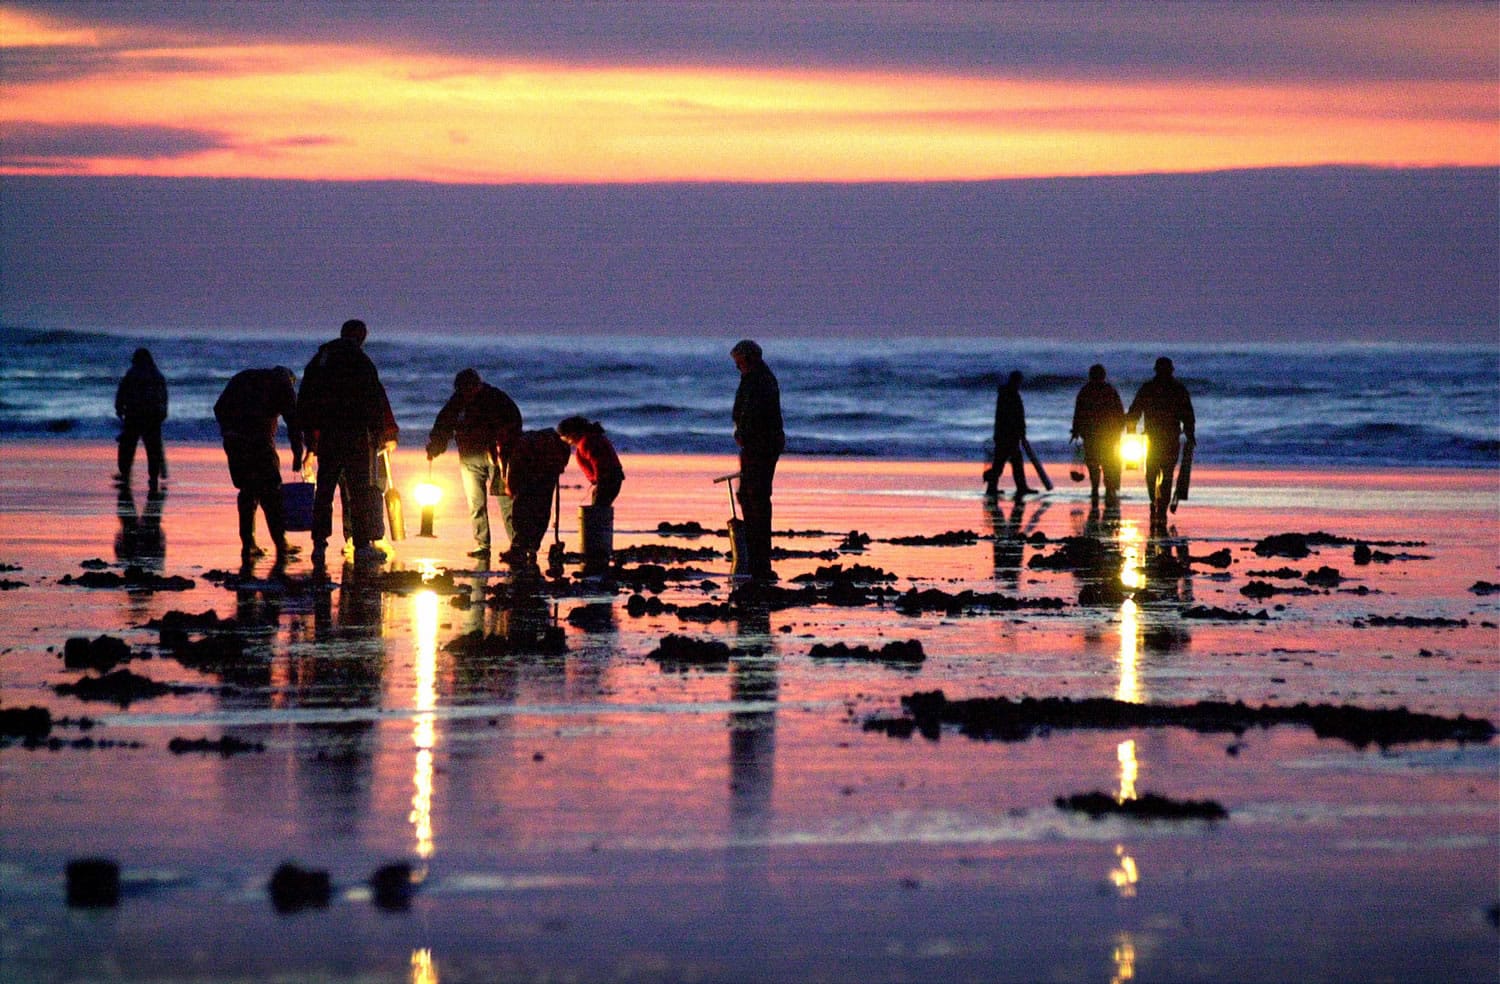 Razor clam dates are an economic shot in the arm to coastal comunities during the winter months.